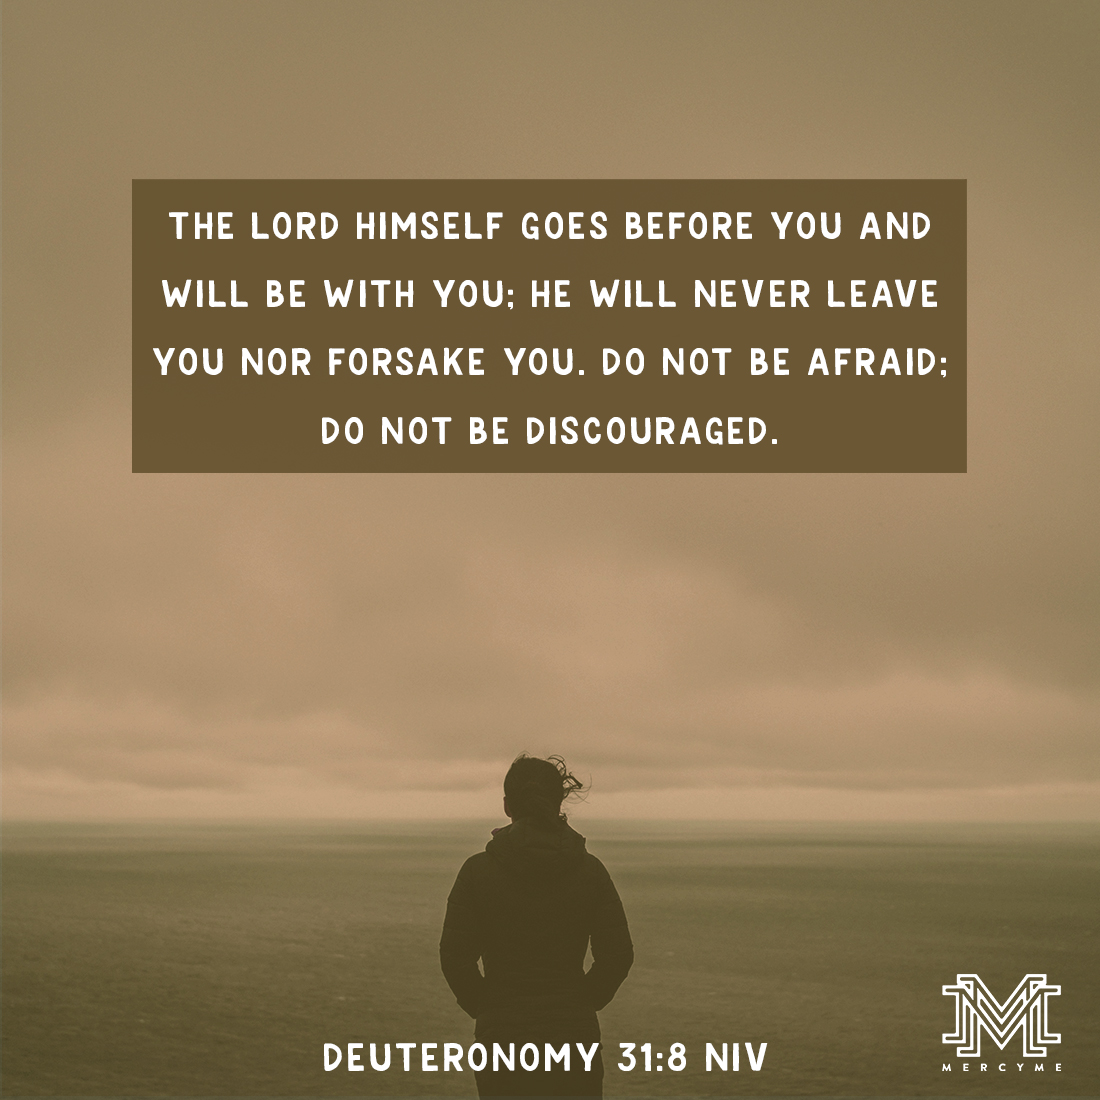 The Lord himself goes before you and will be with you; he will never leave you nor forsake you. Do not be afraid; do not be discouraged. Deuteronomy 31:8 NIV

#alwaysonlyjesus #hope #faith #grace #jesus #godsword #scripture #godslove #mercyme  #courage #icanonlyimagine